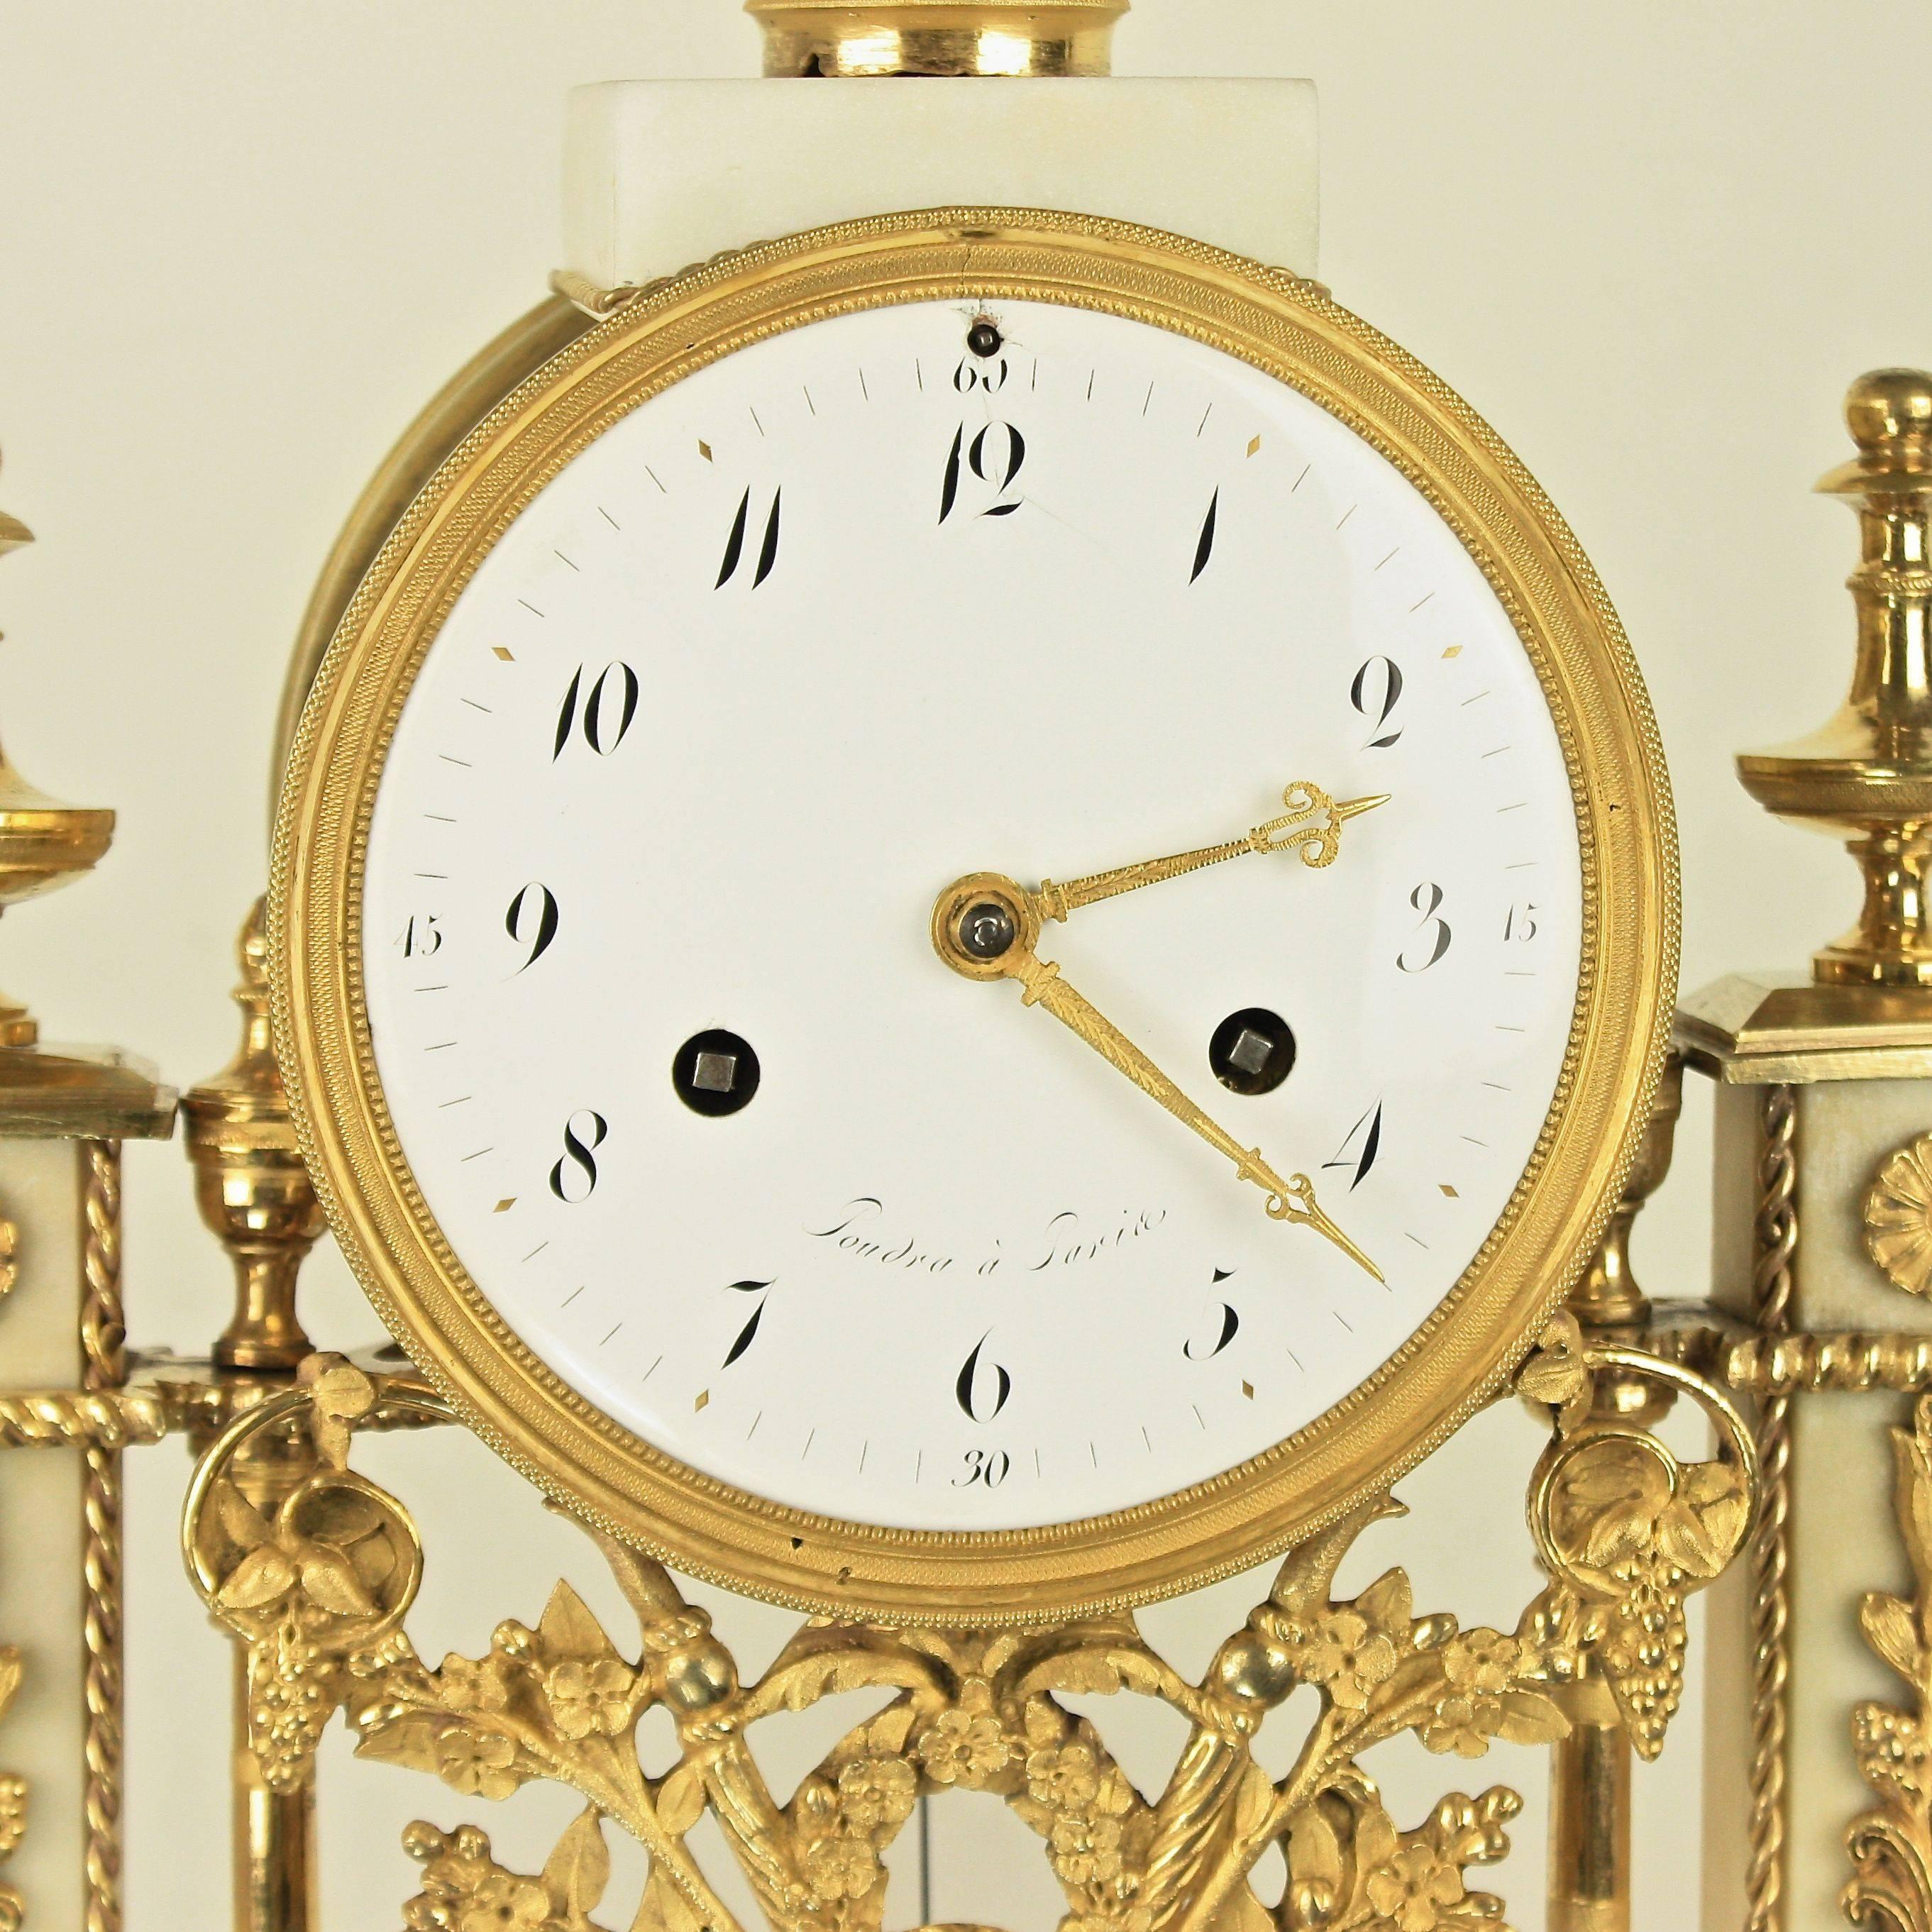 Late 18th century Carrara and black marble ormolu mantel clock, the white enamel dial with Arabic numerals signed „Poudra à Paris“, surmounted by a marble vase overflowing with finely chased ormolu flowers, berries and leaves. The angular columns